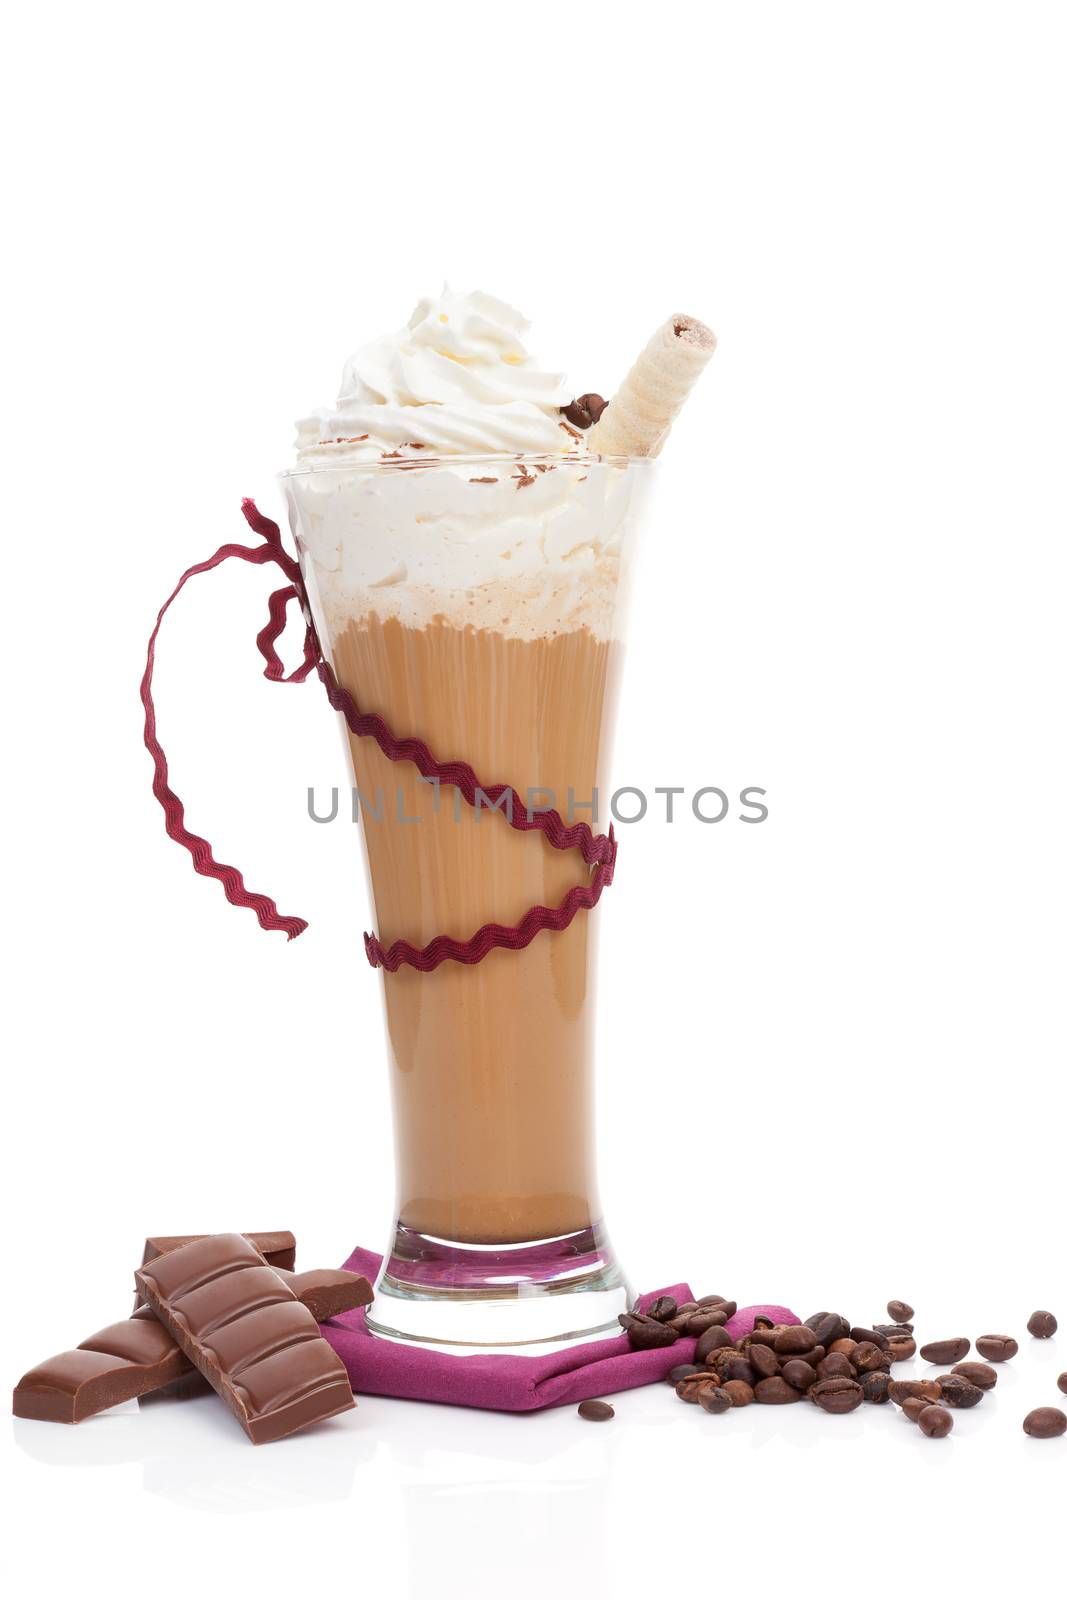 Delicious refreshing ice coffee with cream, rolled wafers, coffee beans and chocolate isolated on white background.